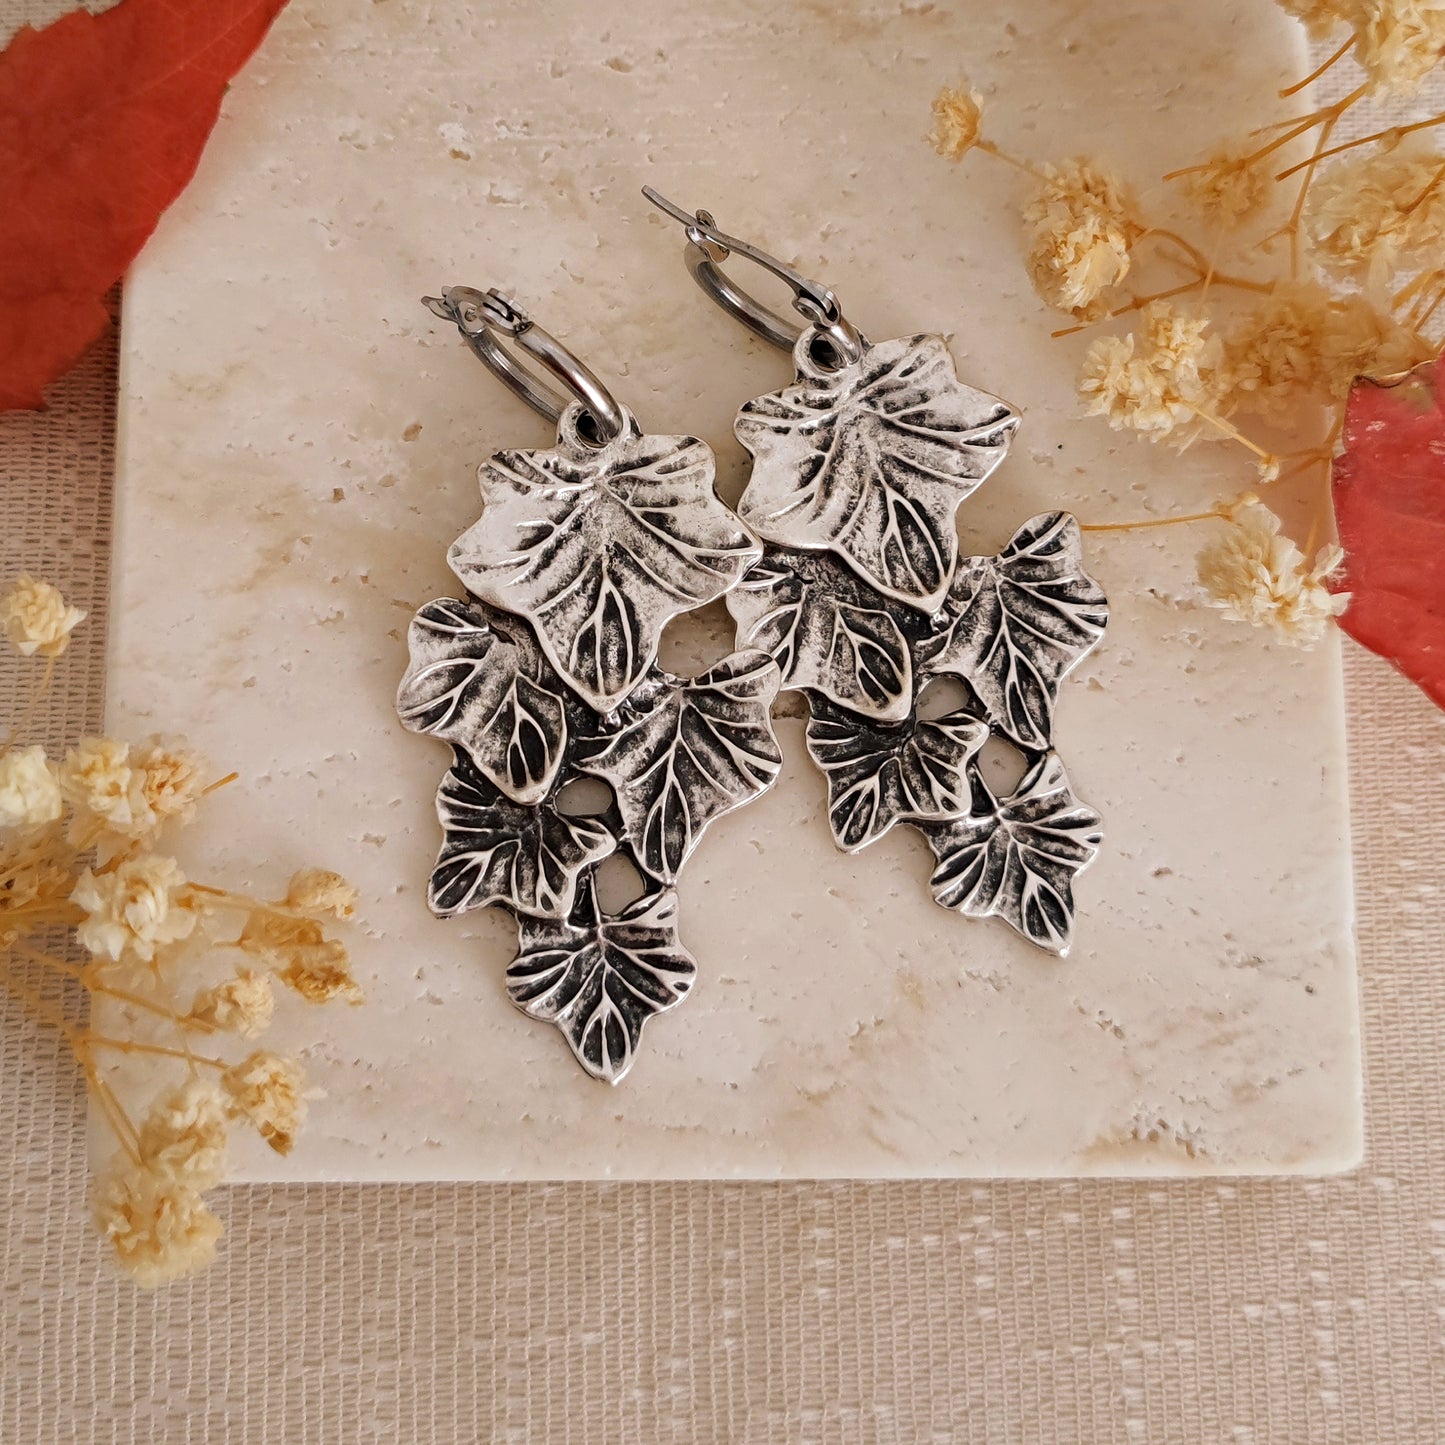 "Ivy of the Forest" earrings